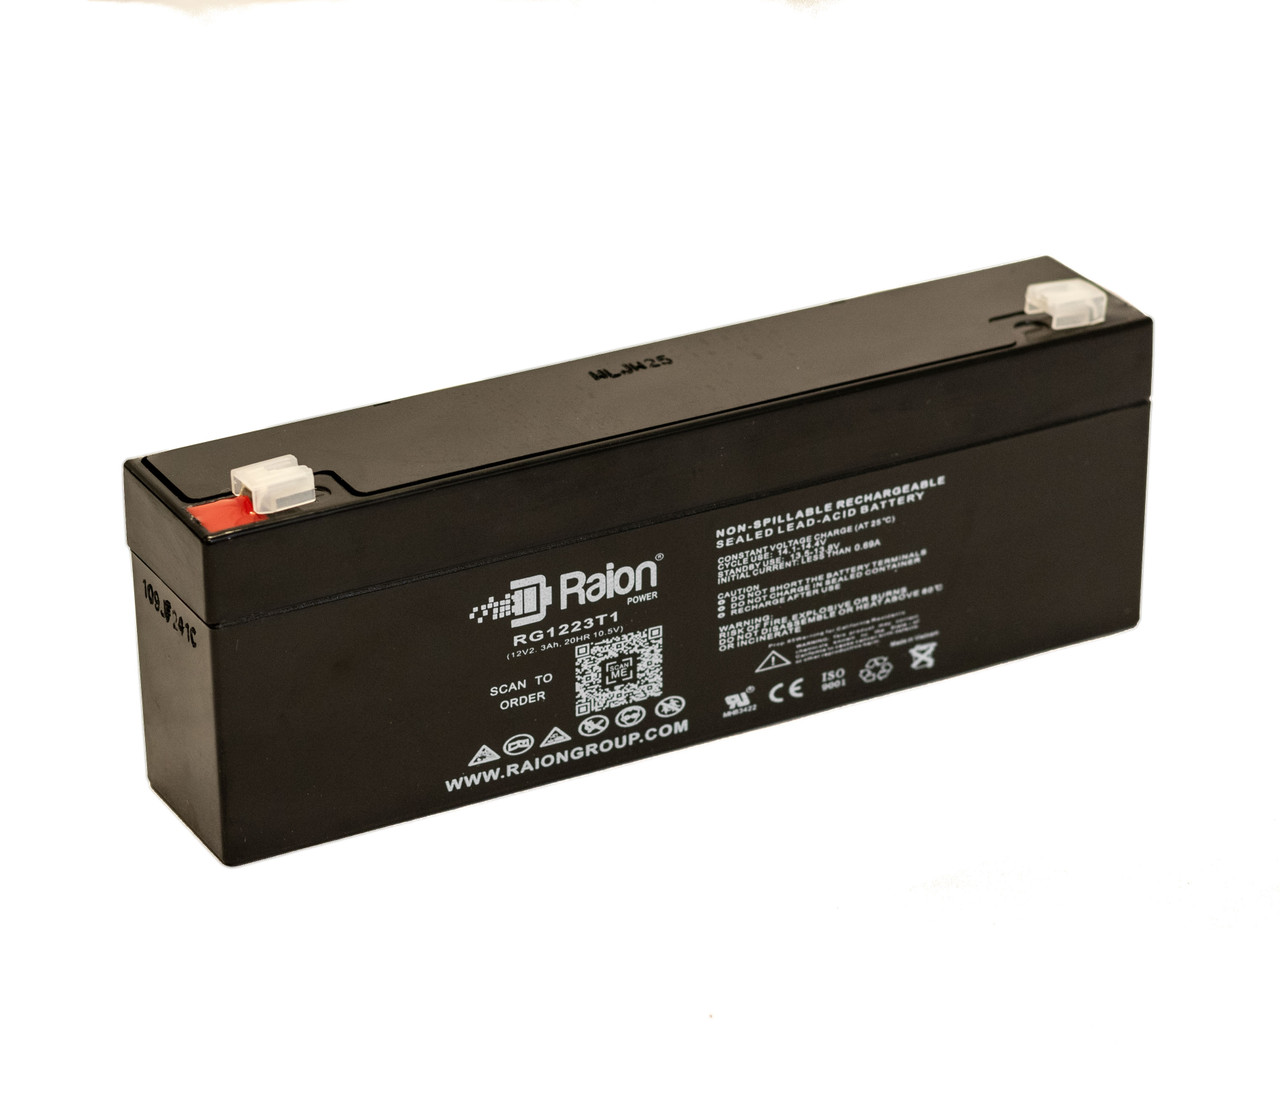 Raion Power RG1223T1 Replacement Battery for B Braun 620-200